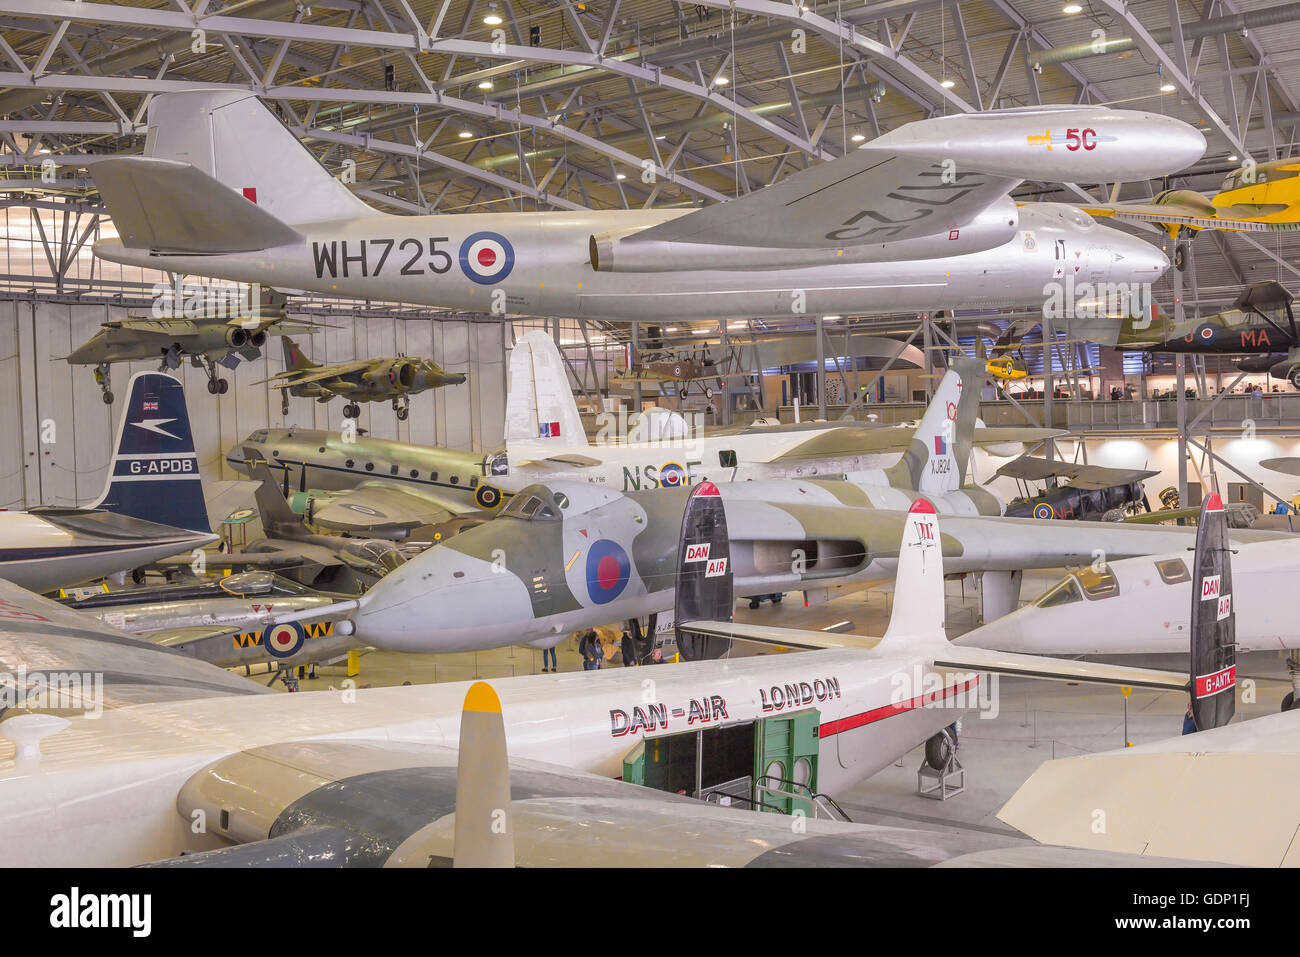 Vintage aircraft on display in a hangar at the Duxford Aircraft Museum in Cambridgeshire, England. Stock Photo